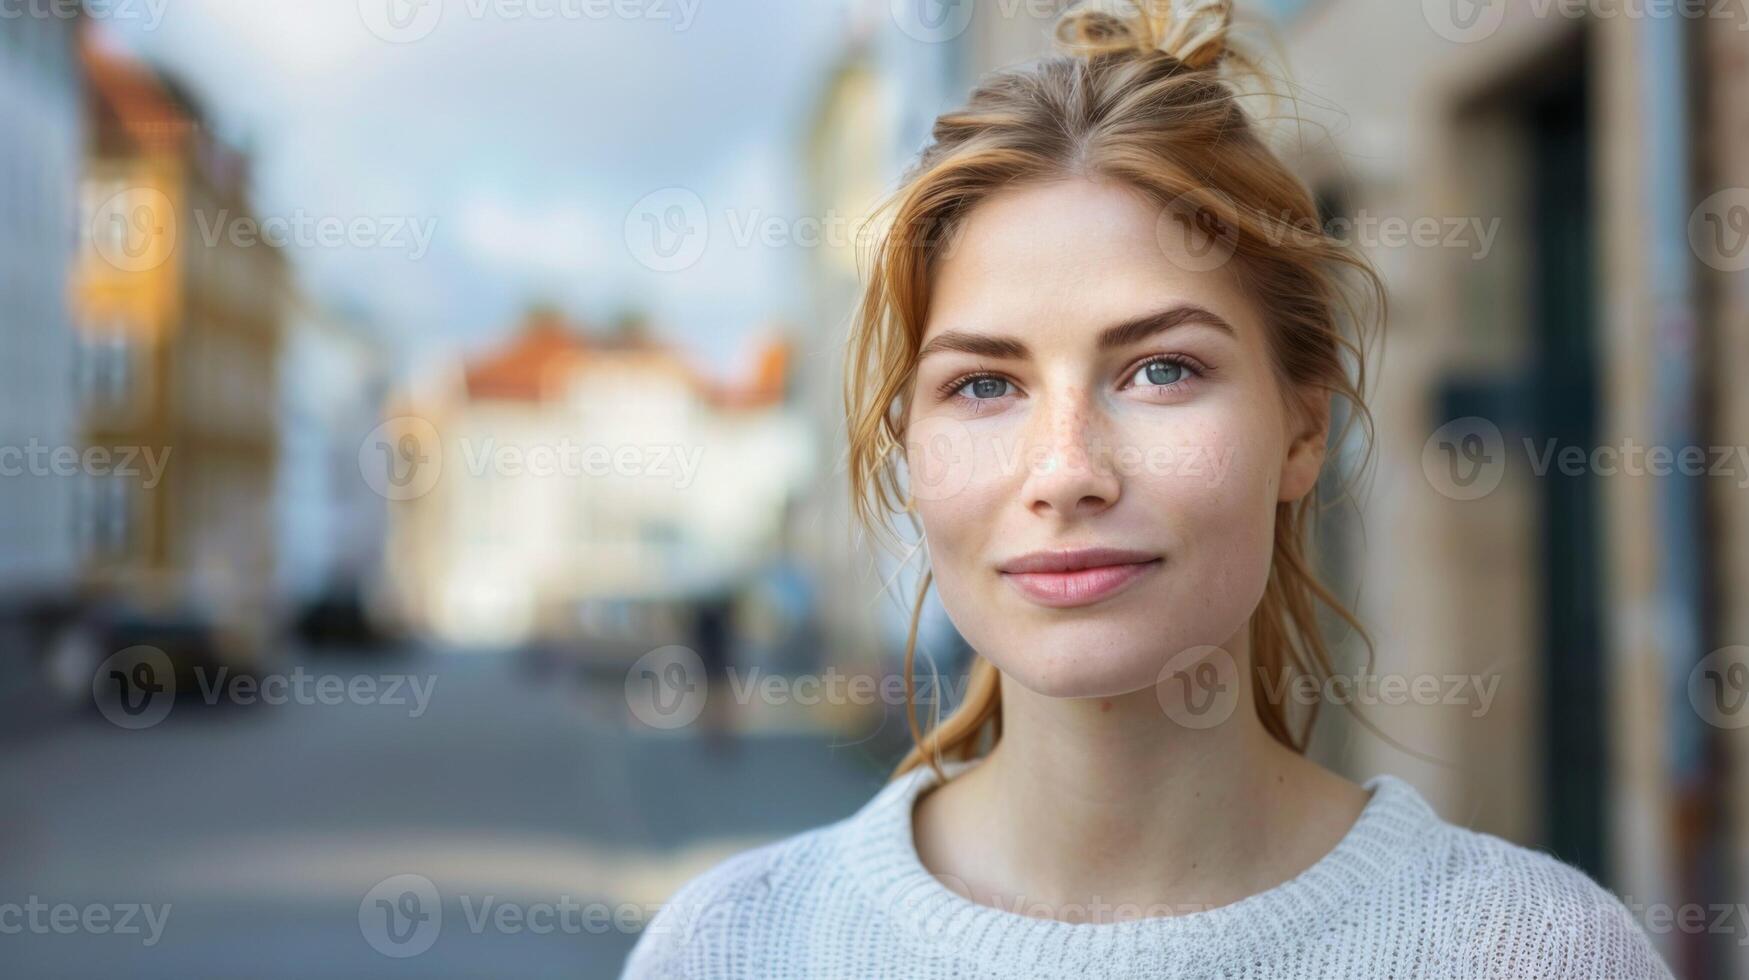 Portrait of a smiling woman from Denmark on a city street exuding beauty and confidence in casual fashion photo